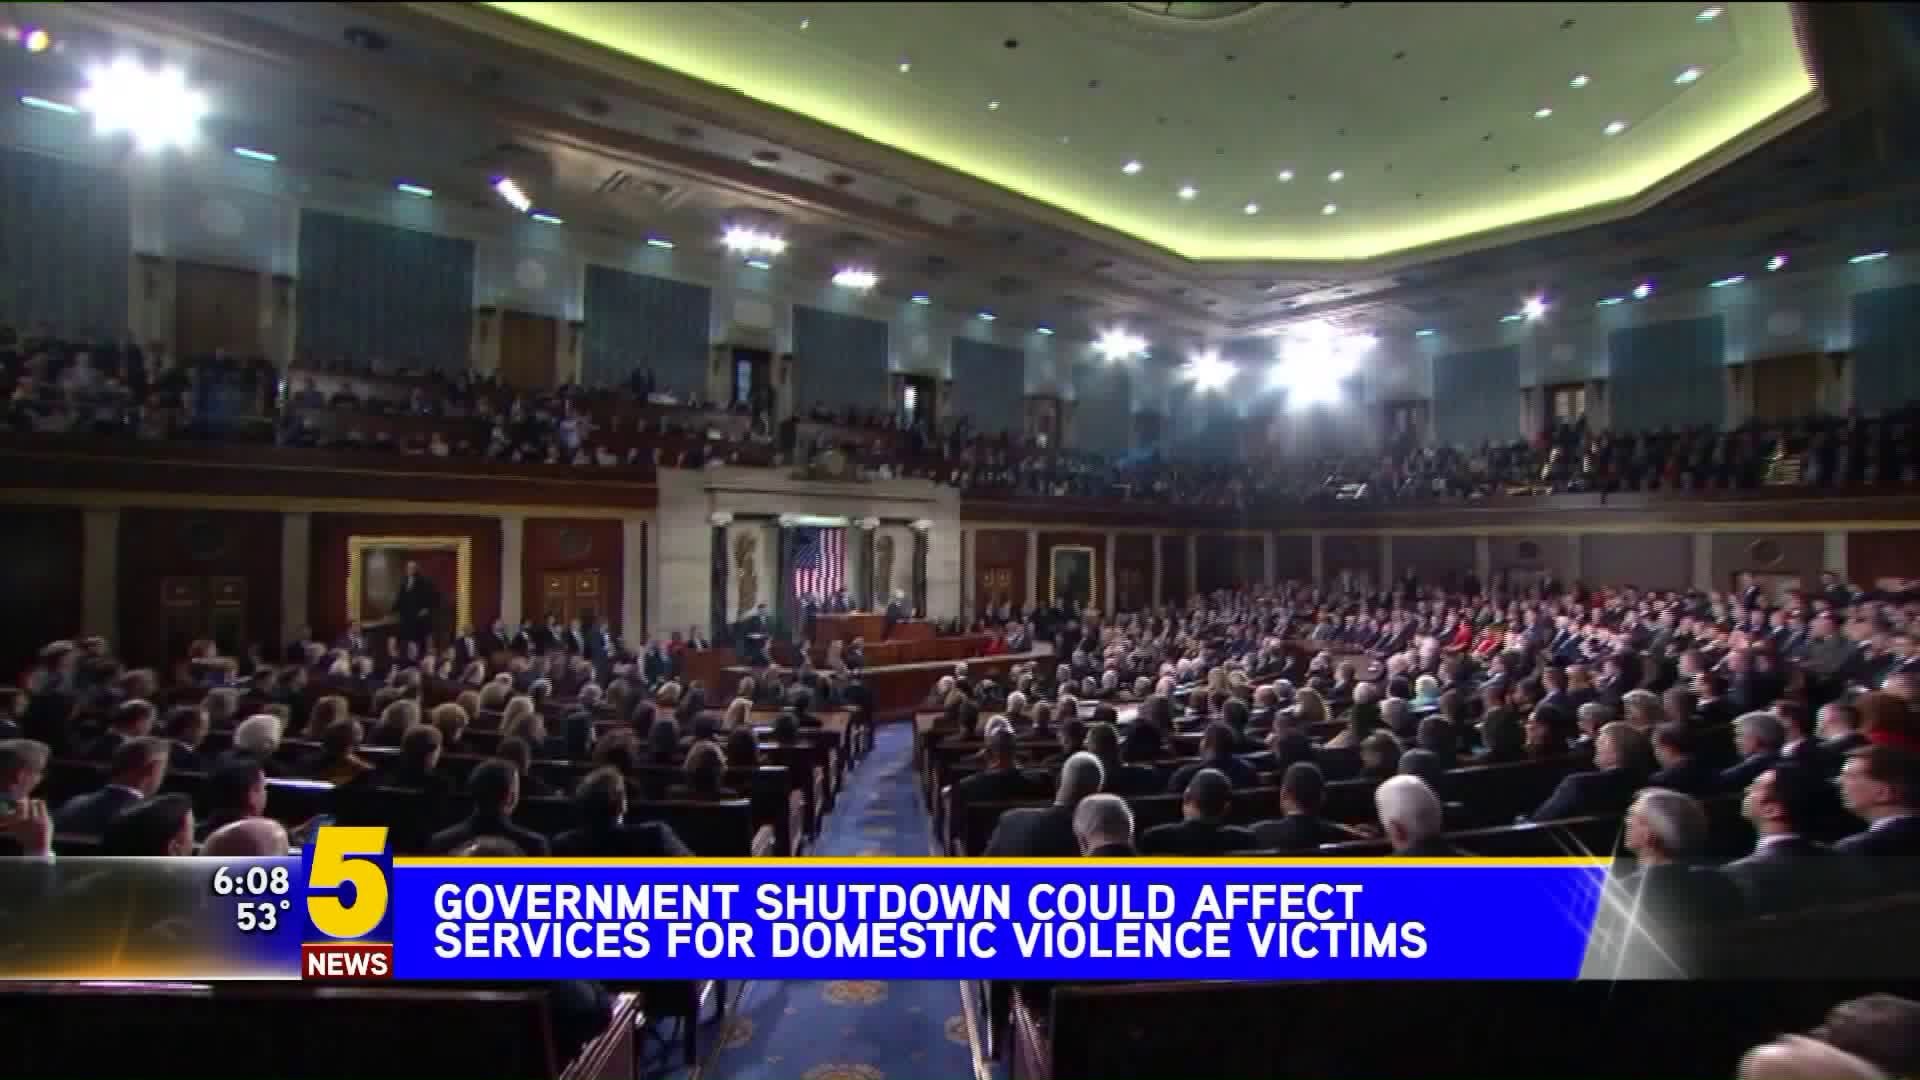 Government Shutdown Could Impact Services For Domestic Viiolence Victims